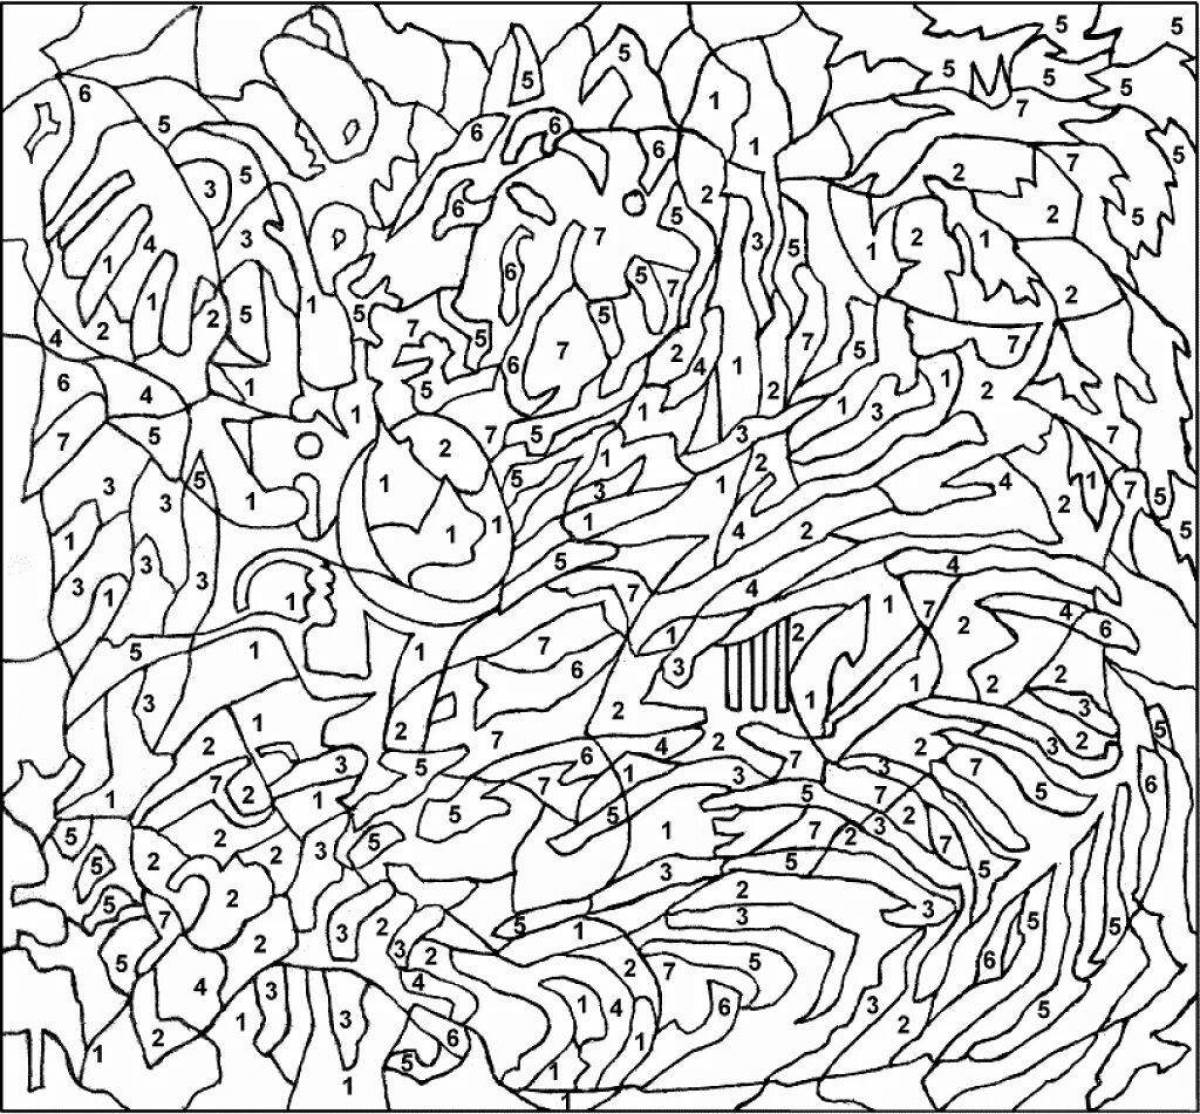 Creative download by number coloring page